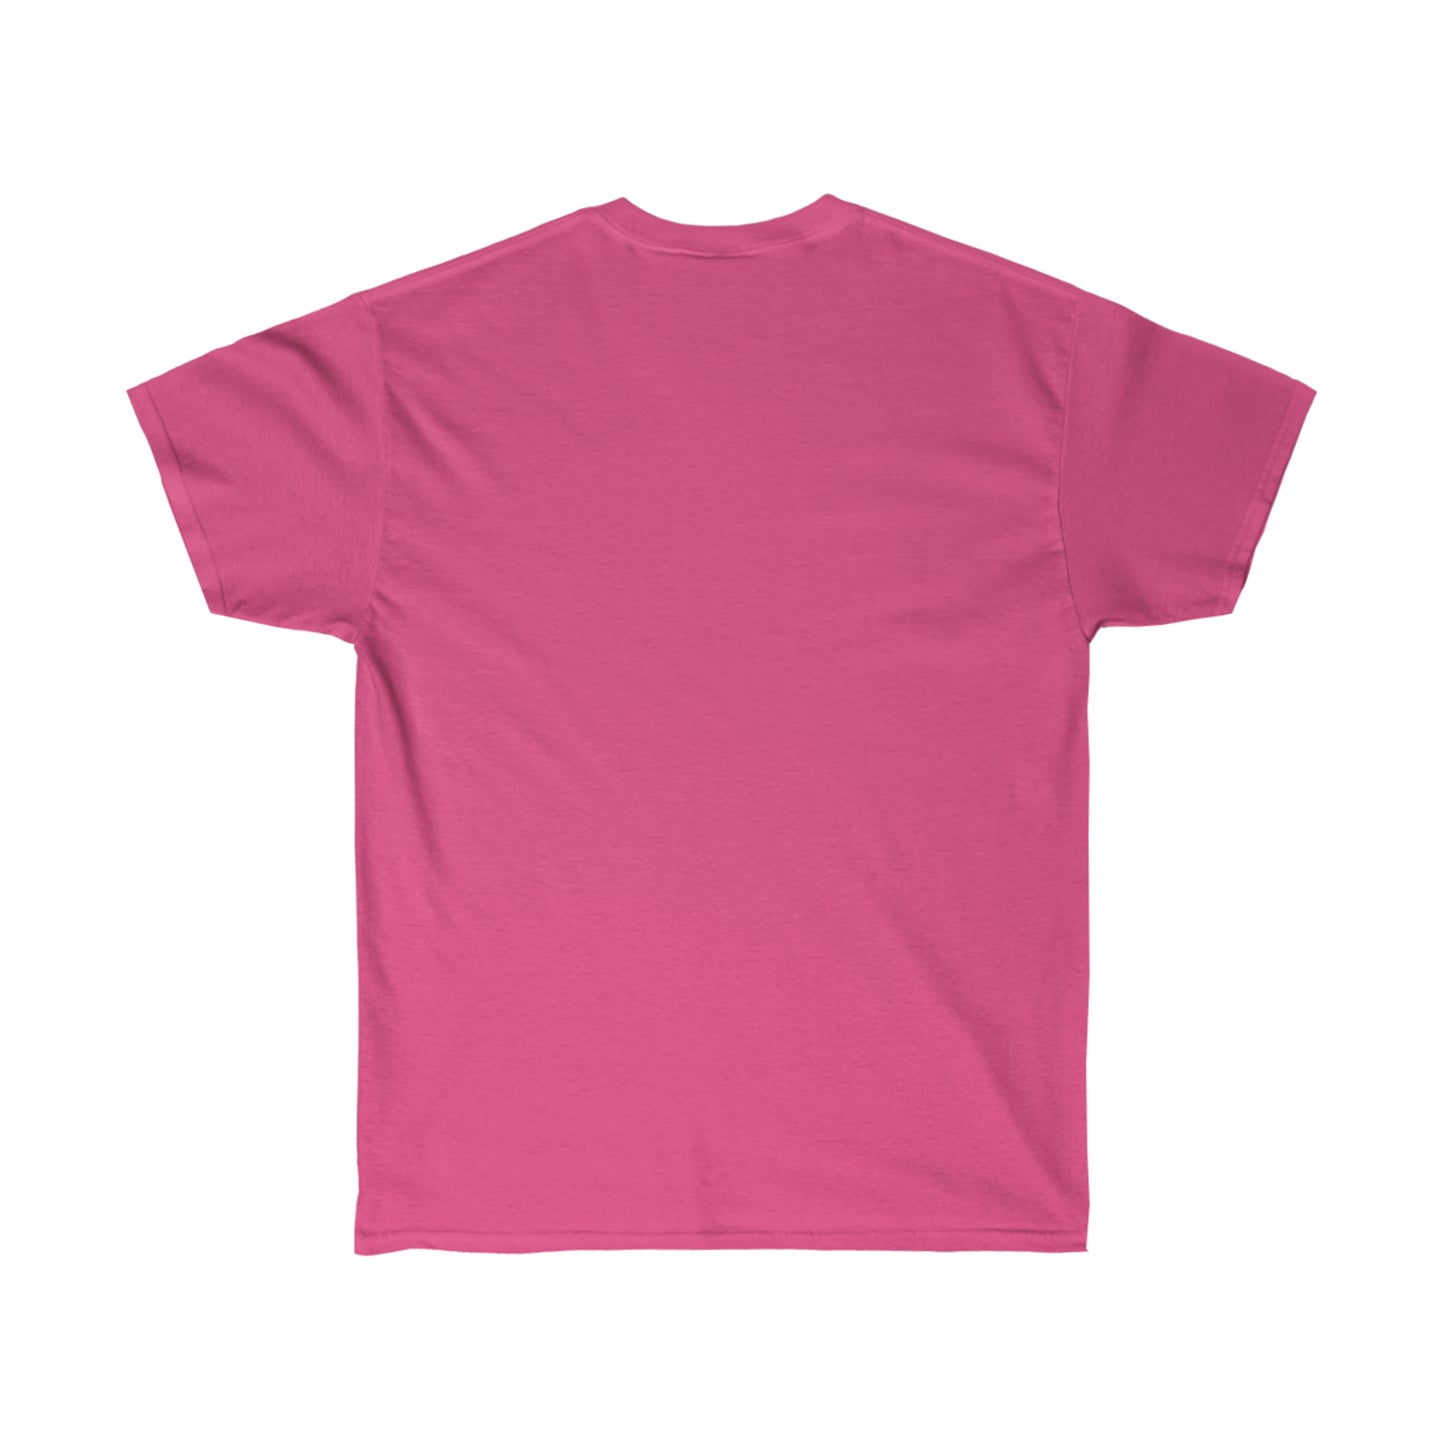 Don't Mess with Trans Kids - Unisex Ultra Cotton Tee